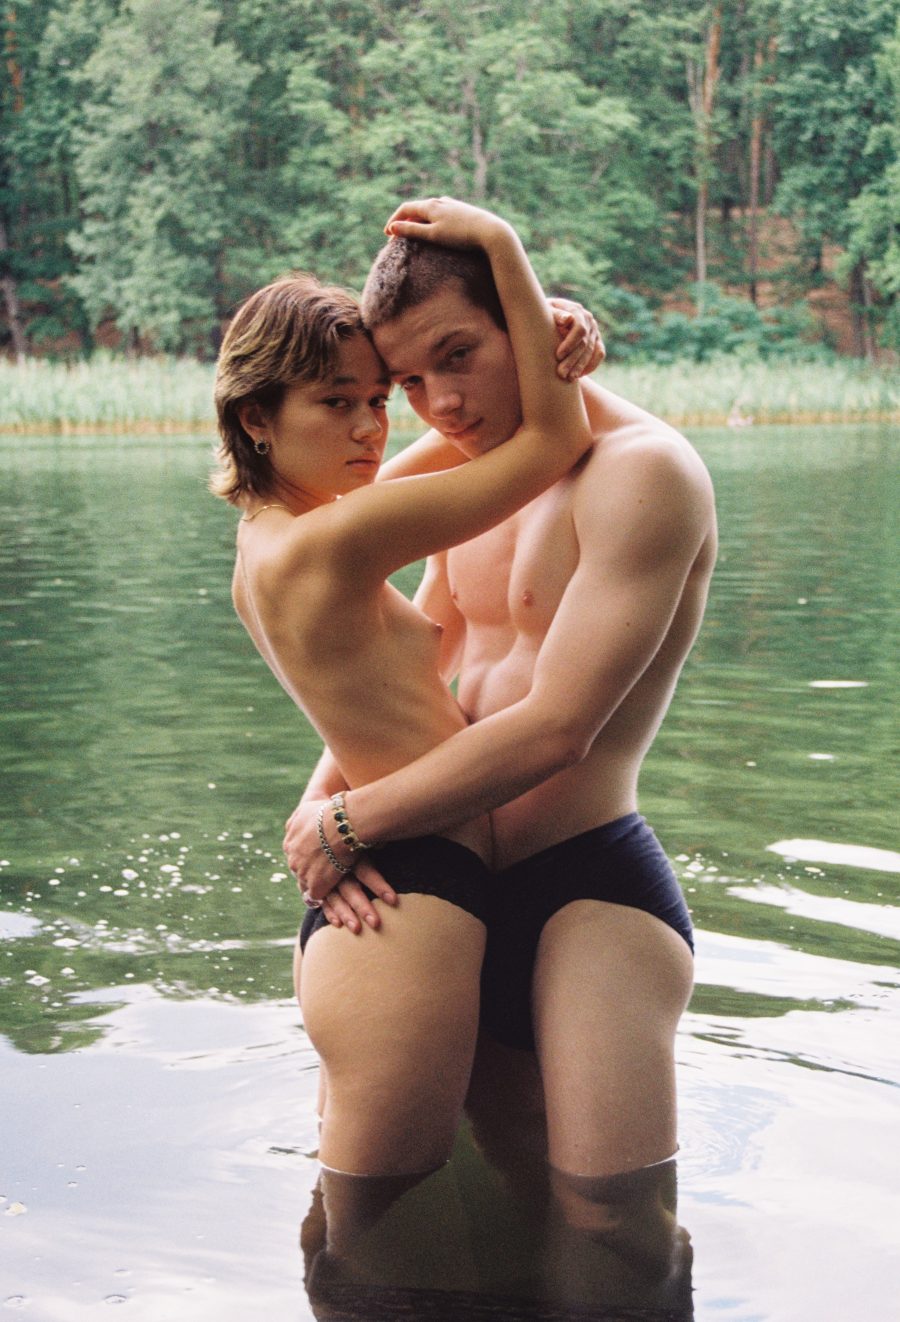 Two people embracing in knee-deep water. They are looking at the camera.